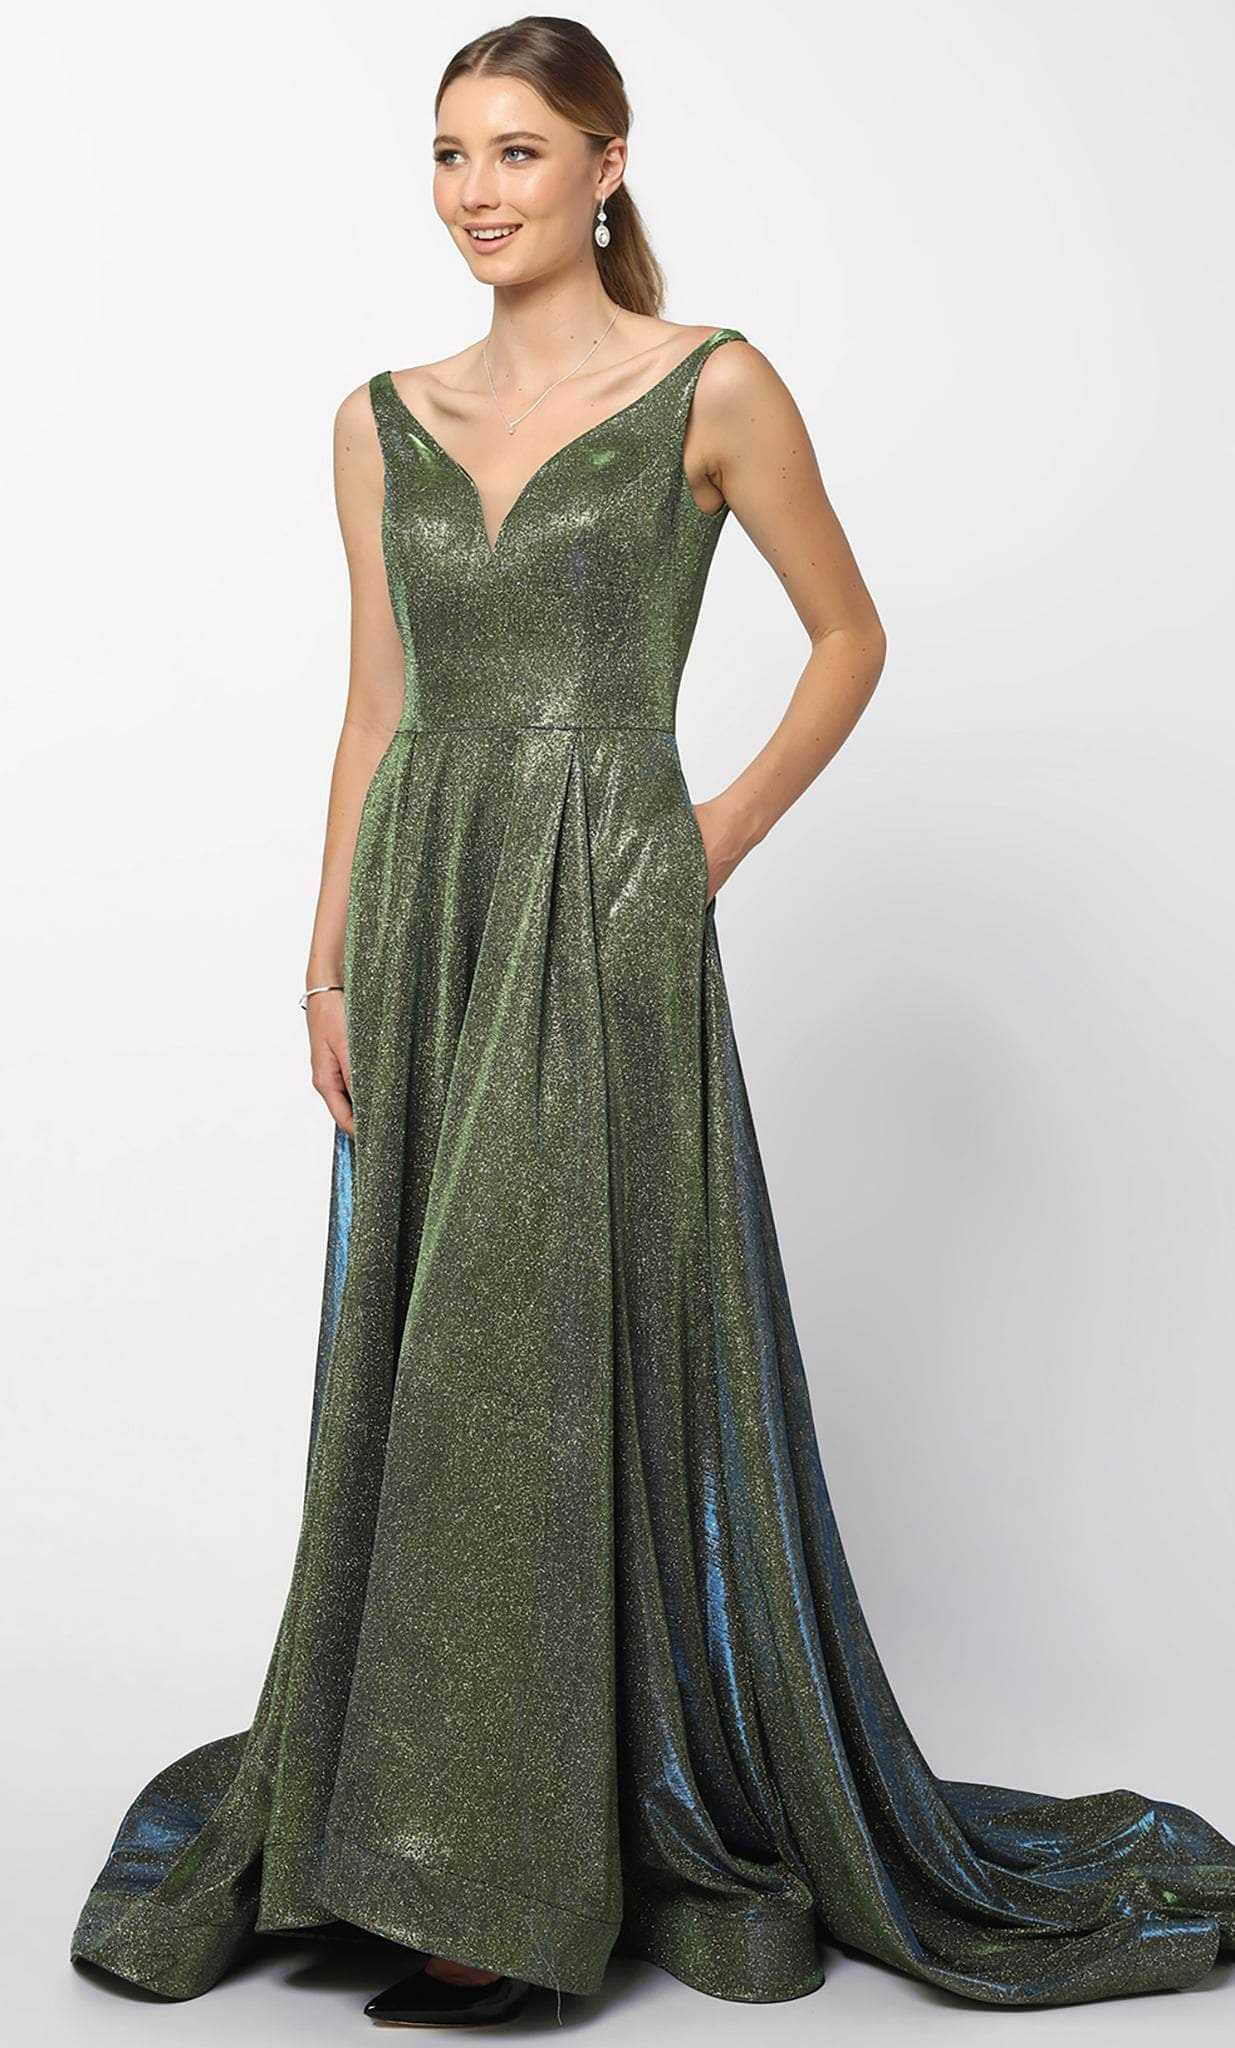 Nox Anabel, Nox Anabel R274 - Wide Neck Glittered Prom Gown